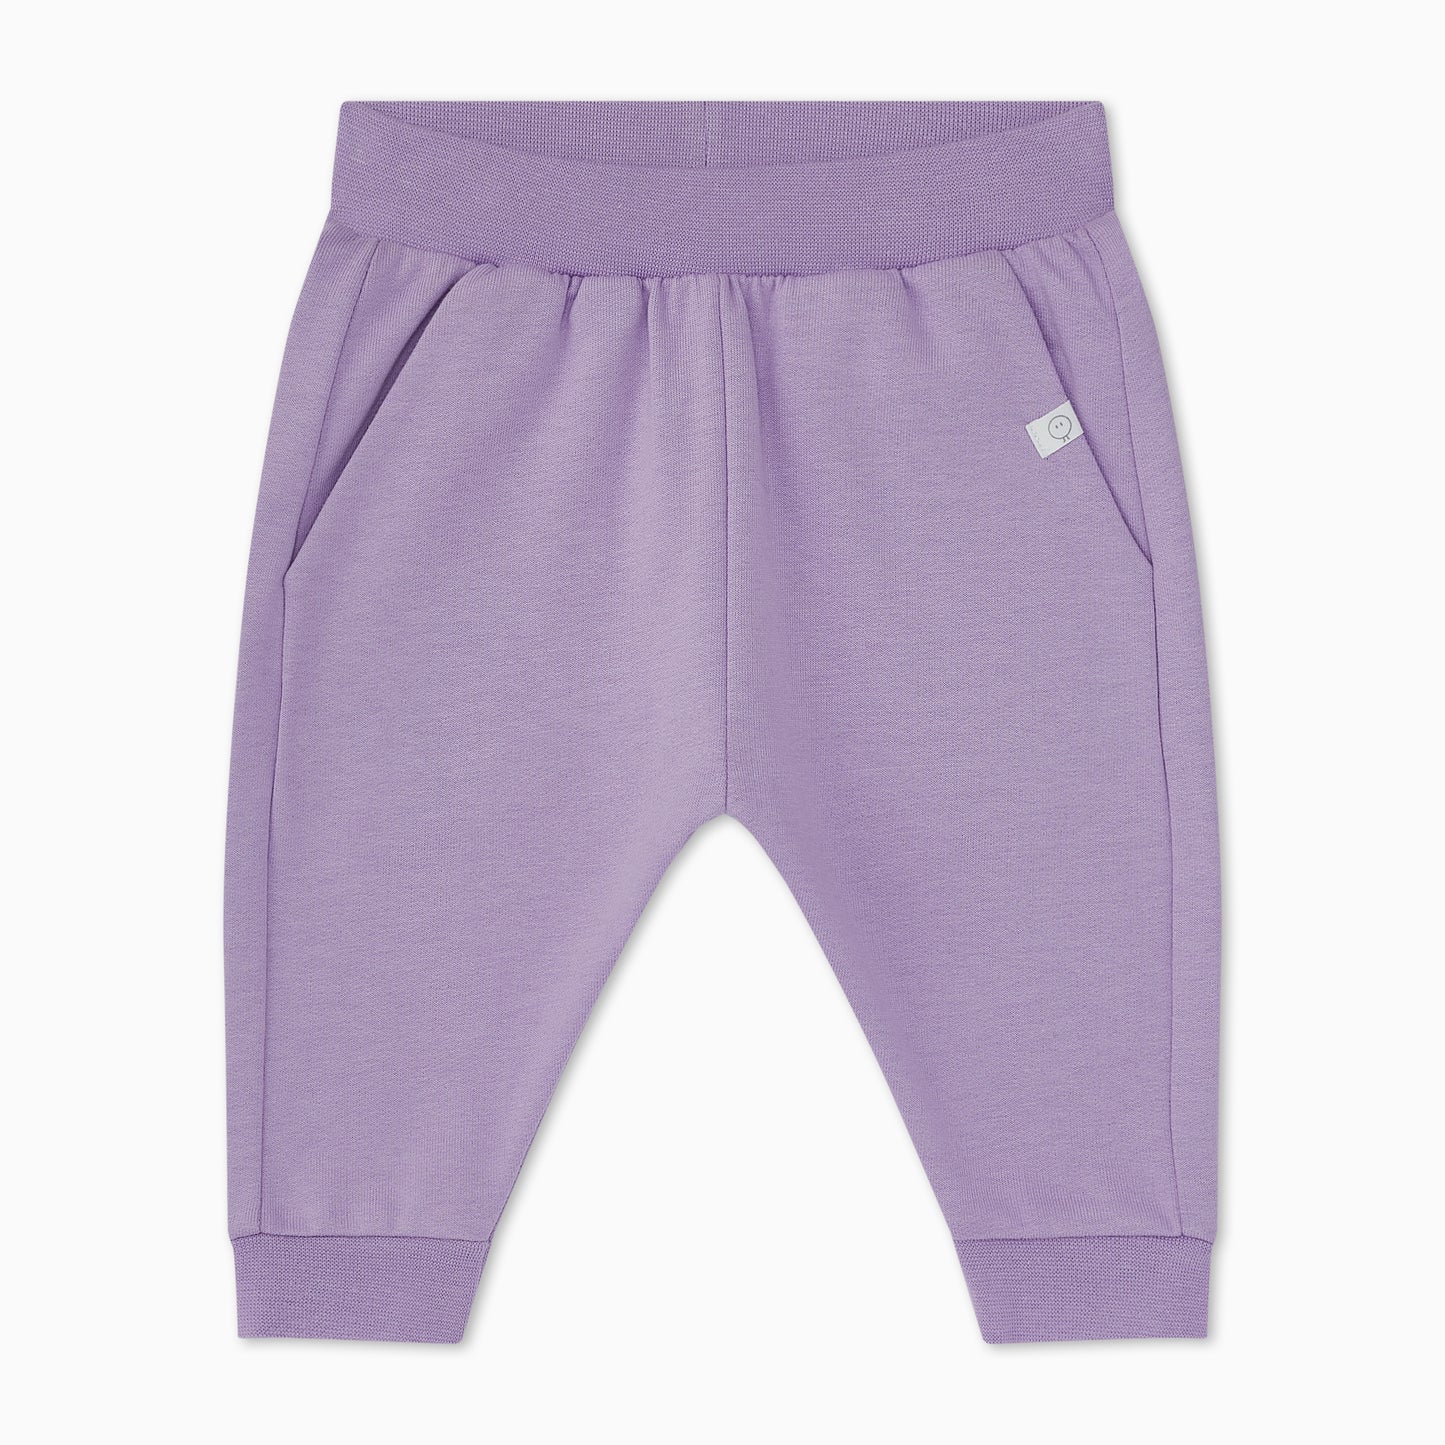 Oversized joggers - lilac